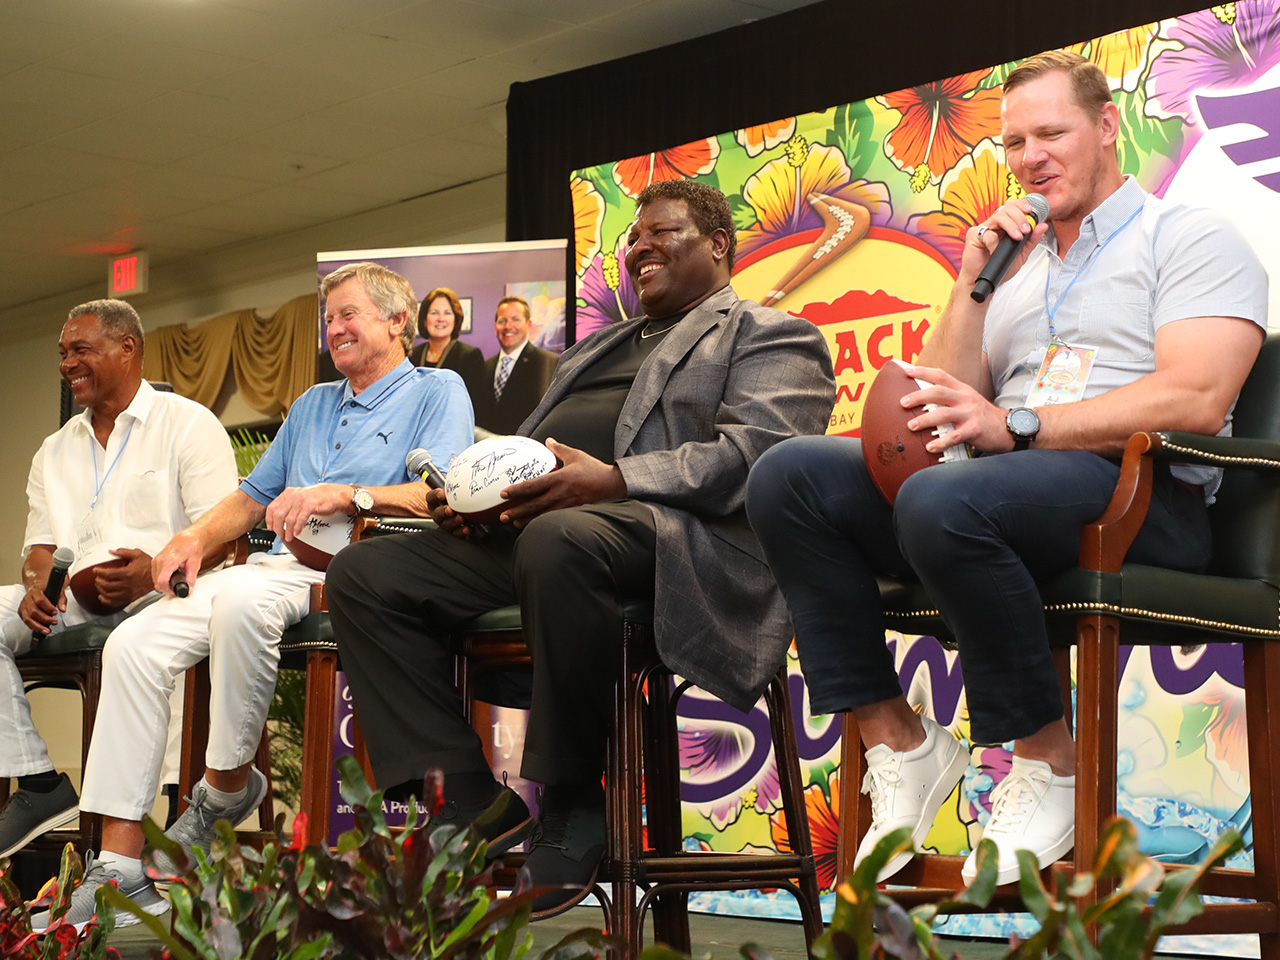 Nat Moore, Steve Spurrier, Jimmie Giles and A.J. Edds take part in a Q&A for the crowd